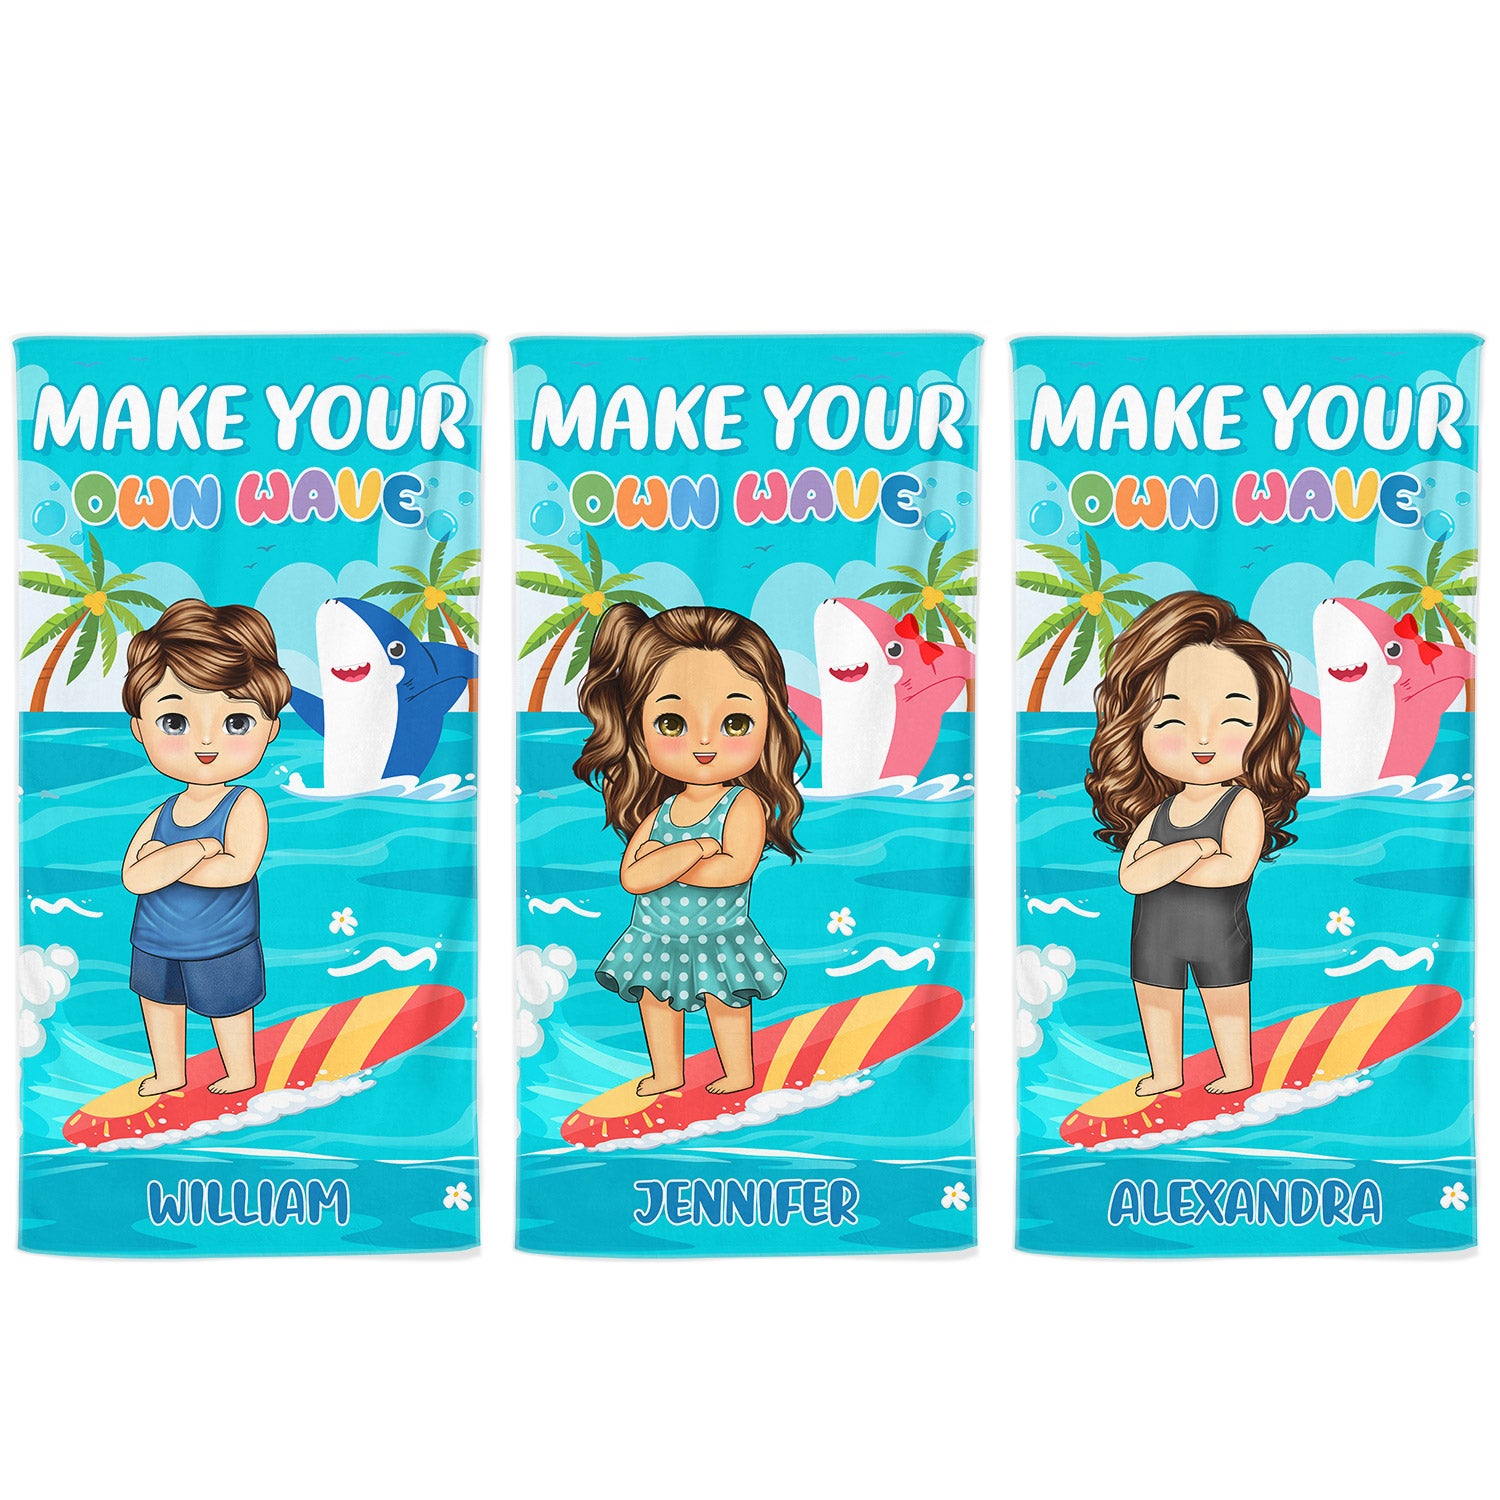 Make Your Own Wave - Summer, Vacation, Beach Funny Gift For Kids - Personalized Beach Towel